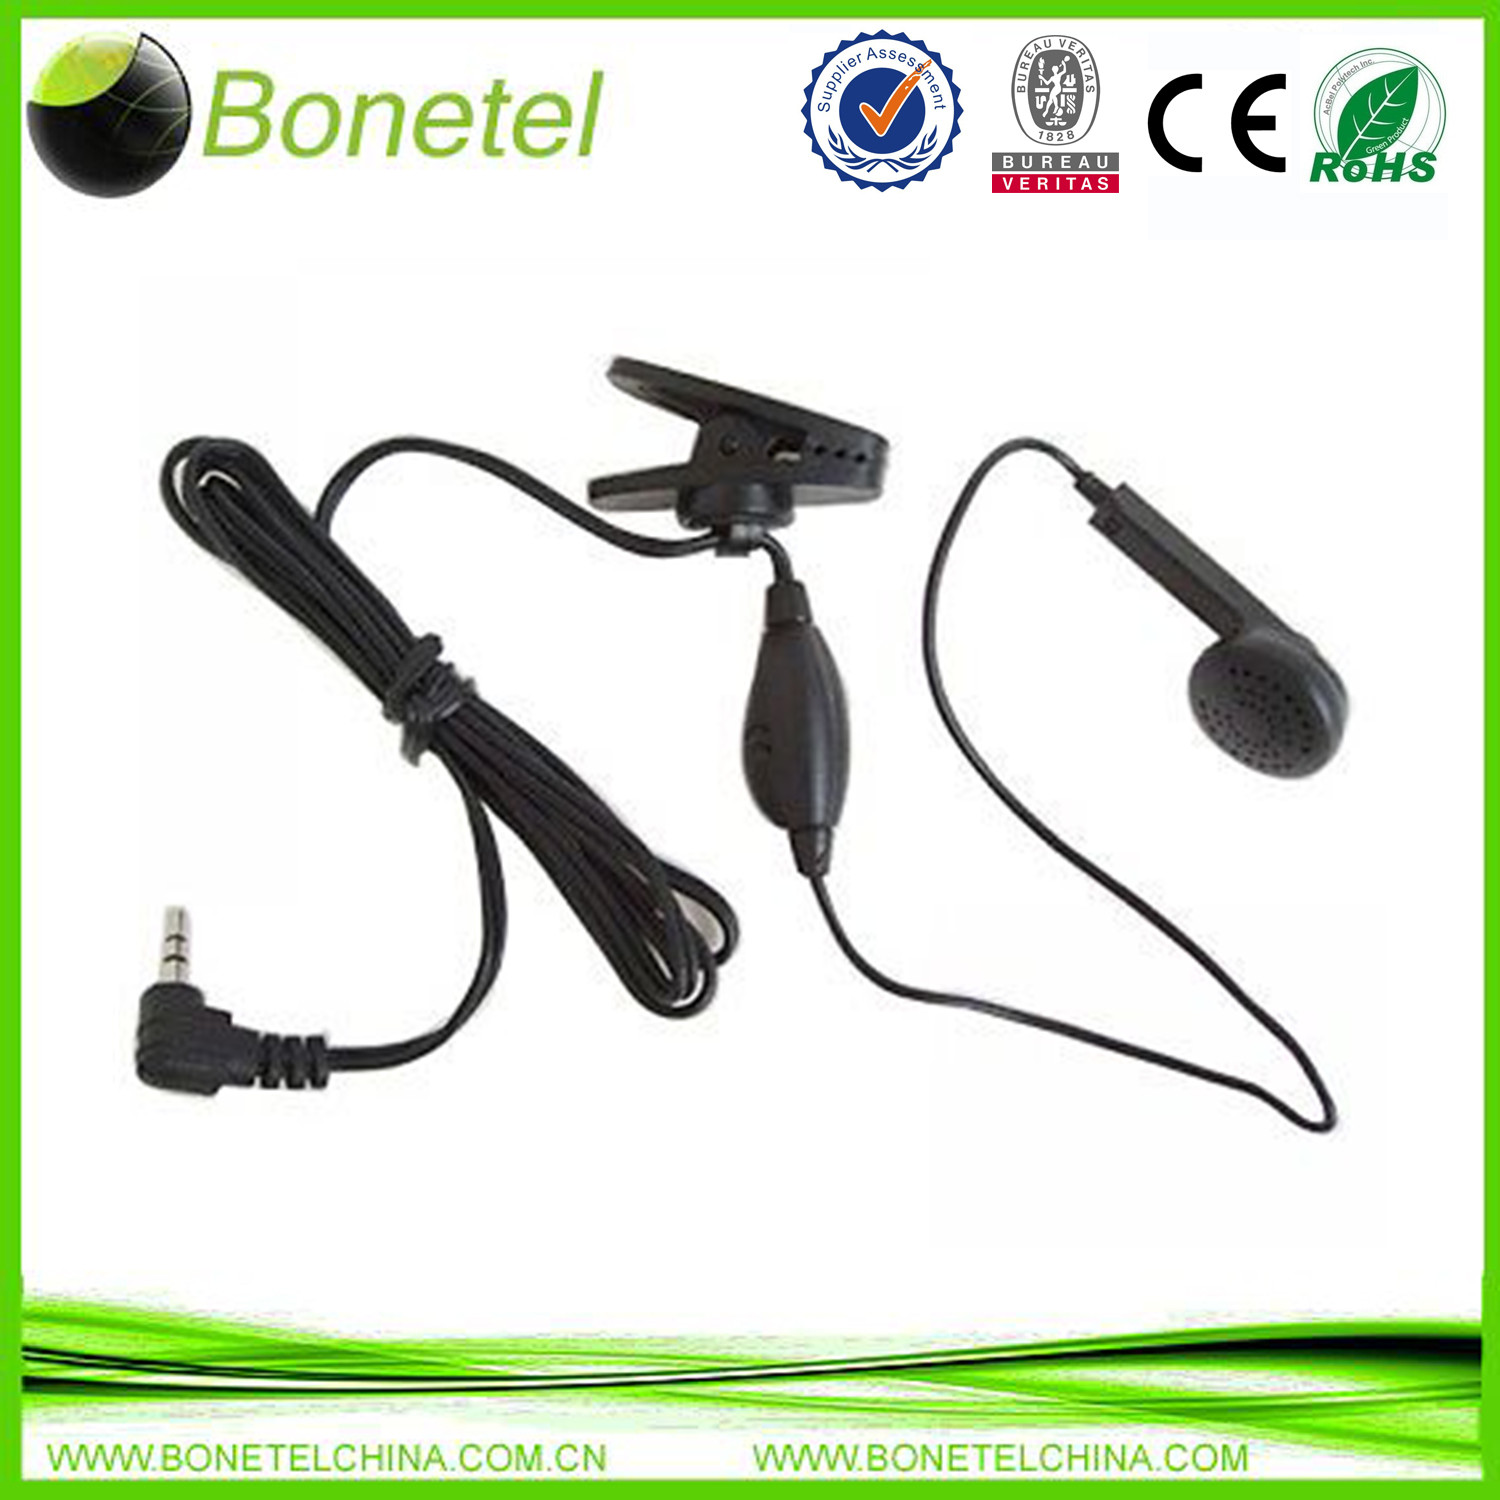 2.5 mm Mono Earphone Headphone with in Line Mic for Nokia 2610 2630 2760 6300